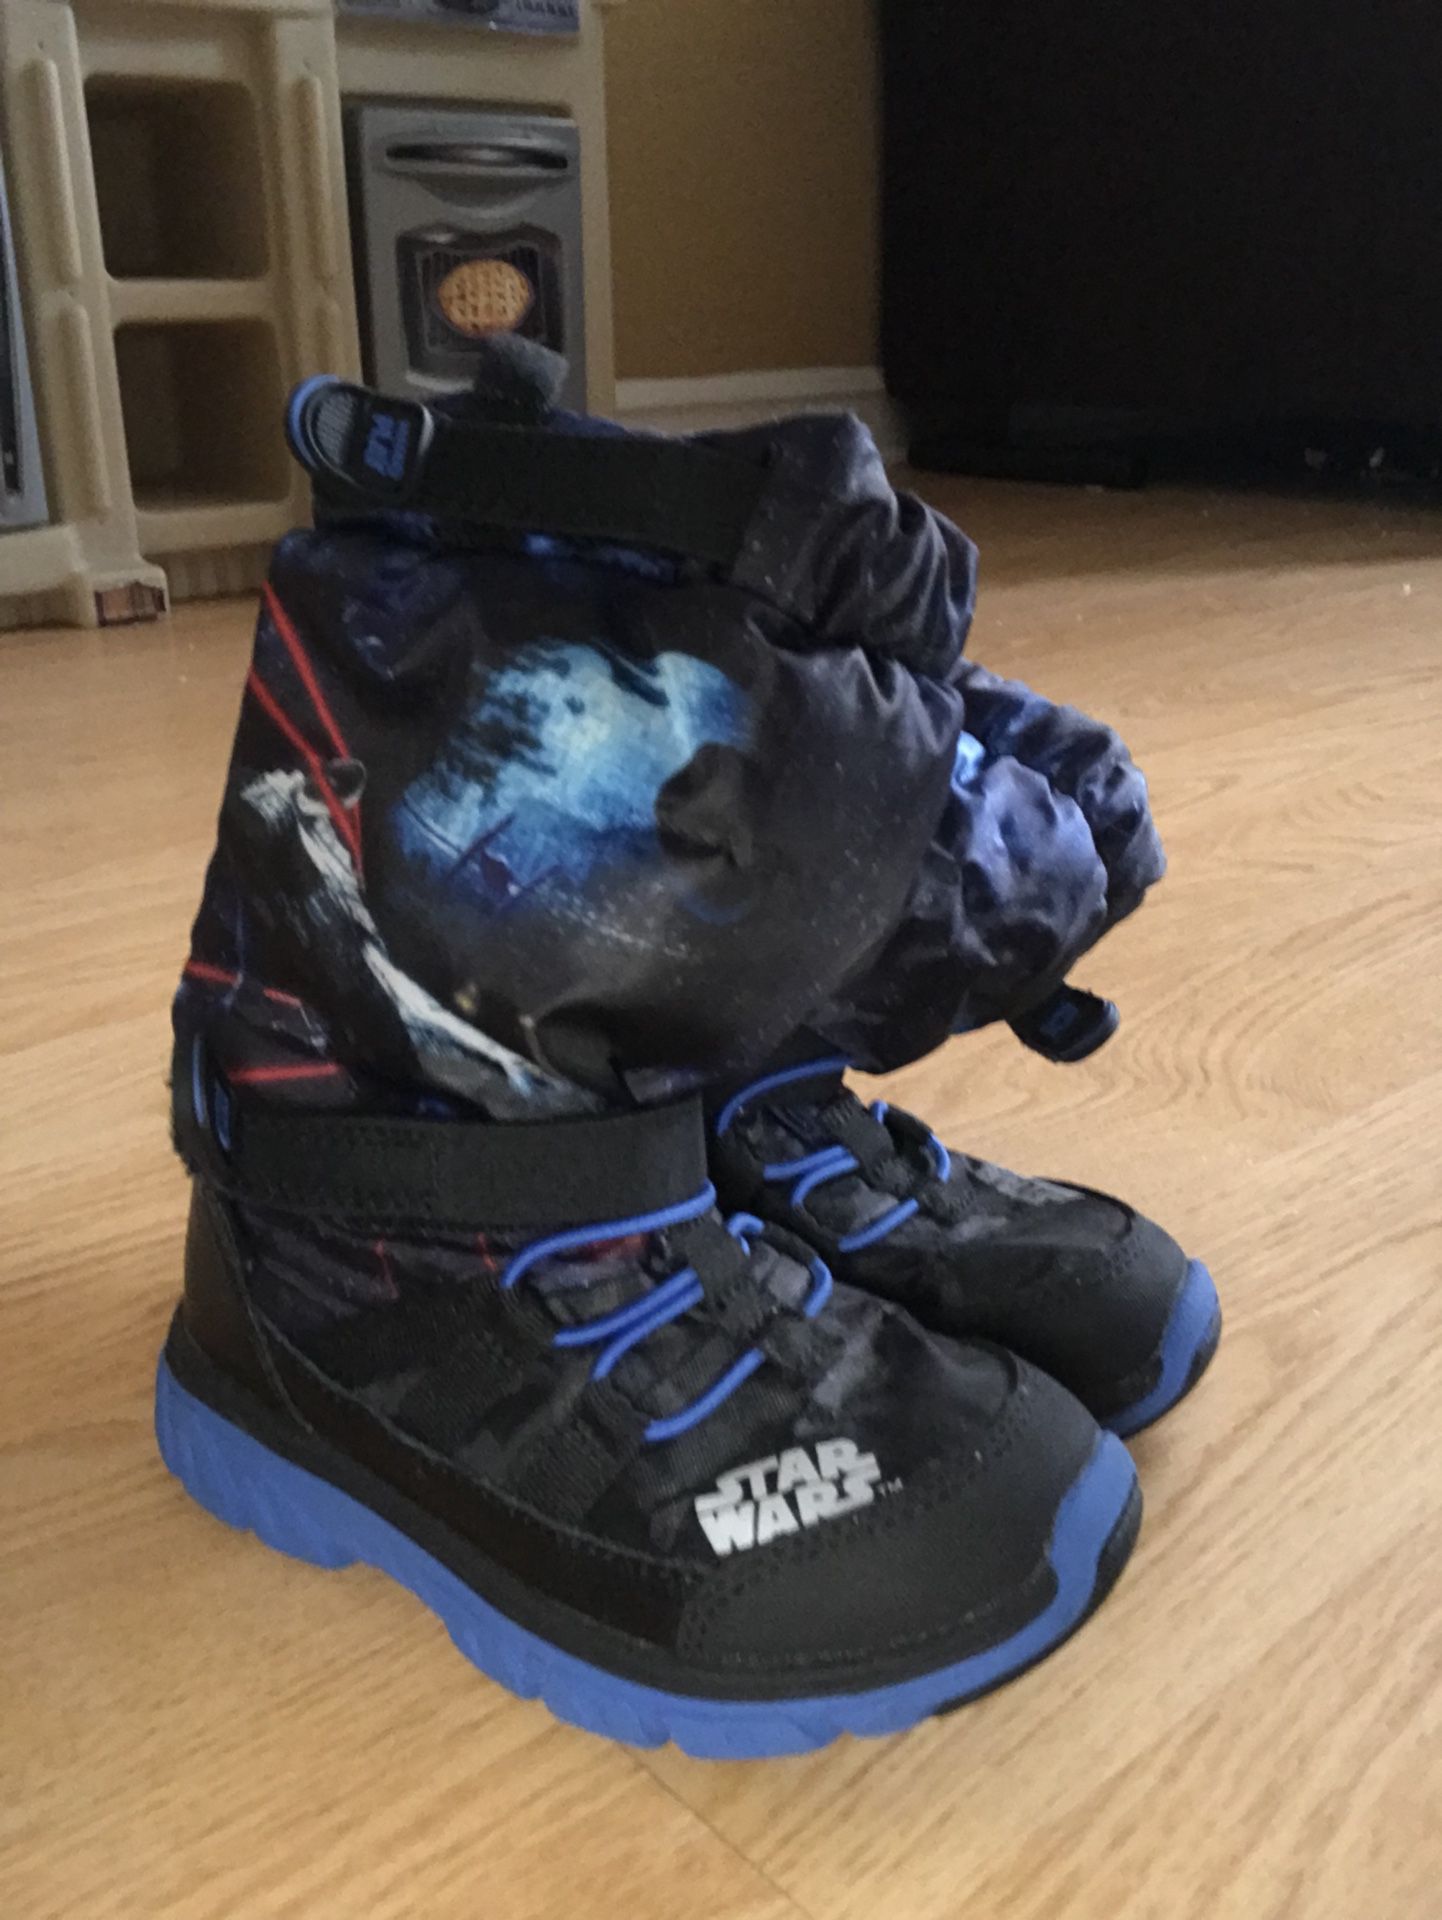 Stride-rite Star Wars snow sneaker boots - size 10 toddler